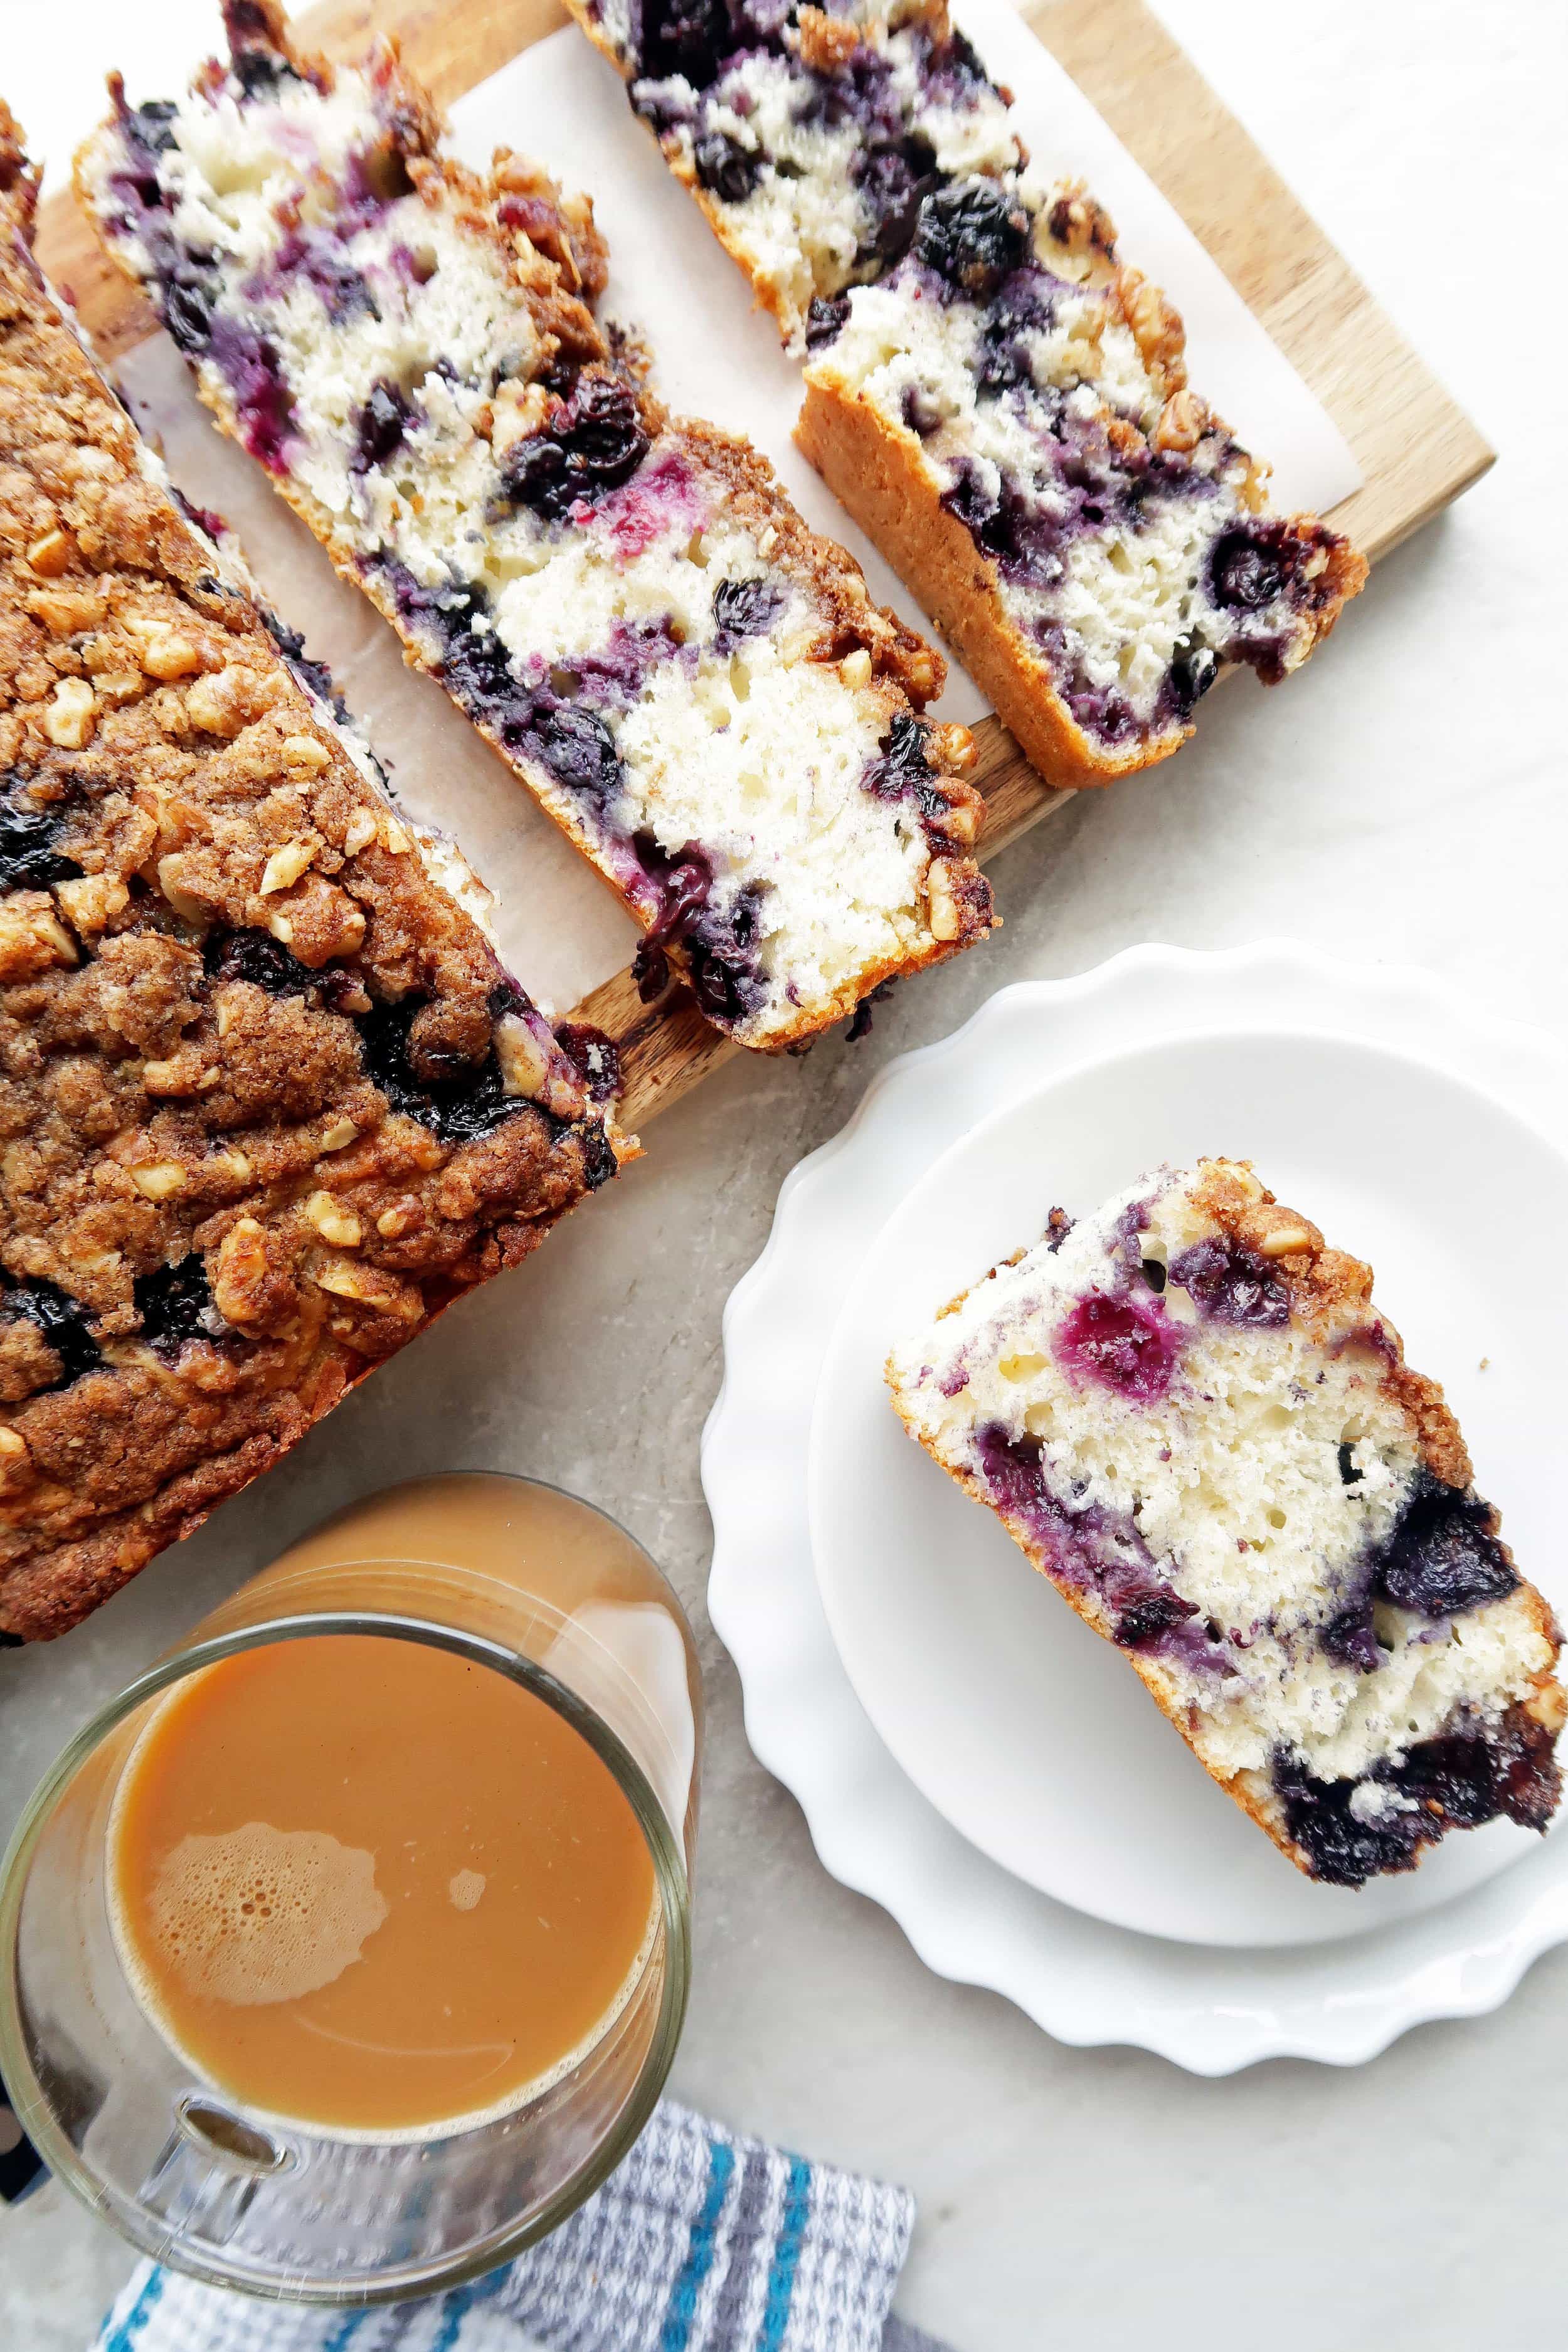 Blueberry coffee cake with crumble on a wooden board and a slice on a white plate.